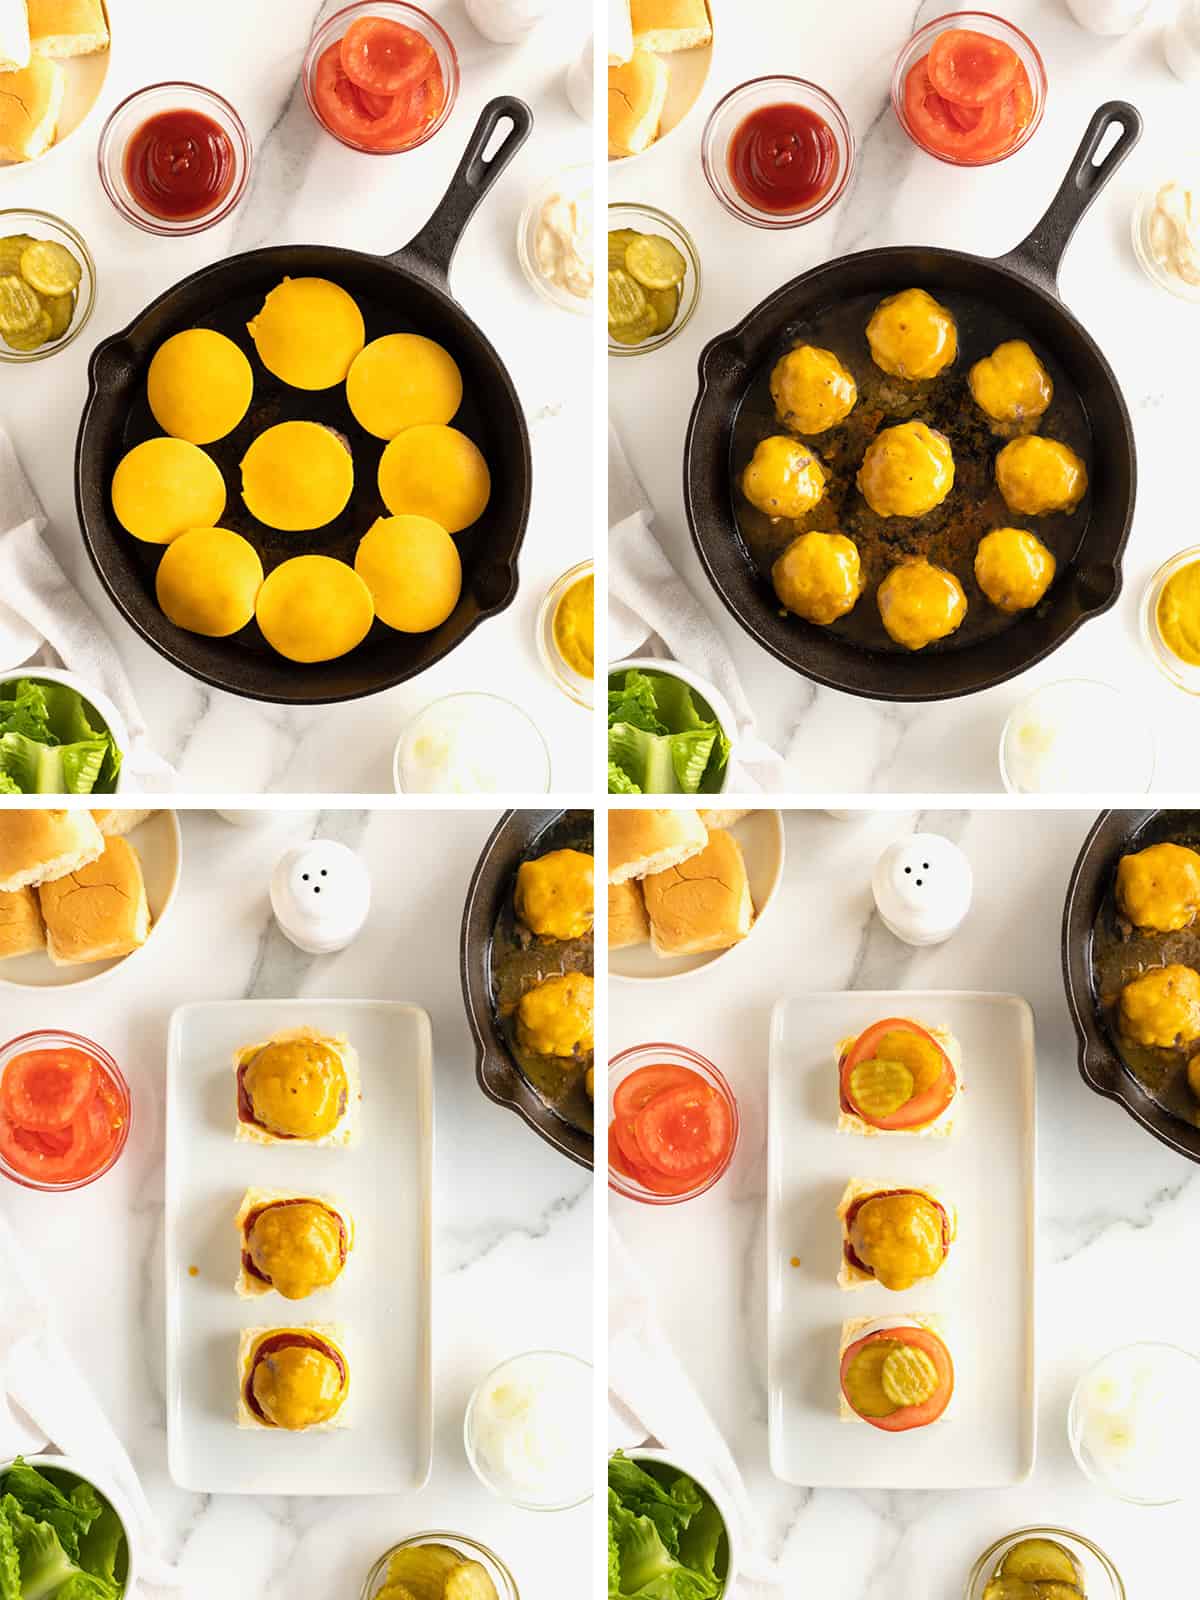 Steps to make mini cheeseburgers in a skillet.